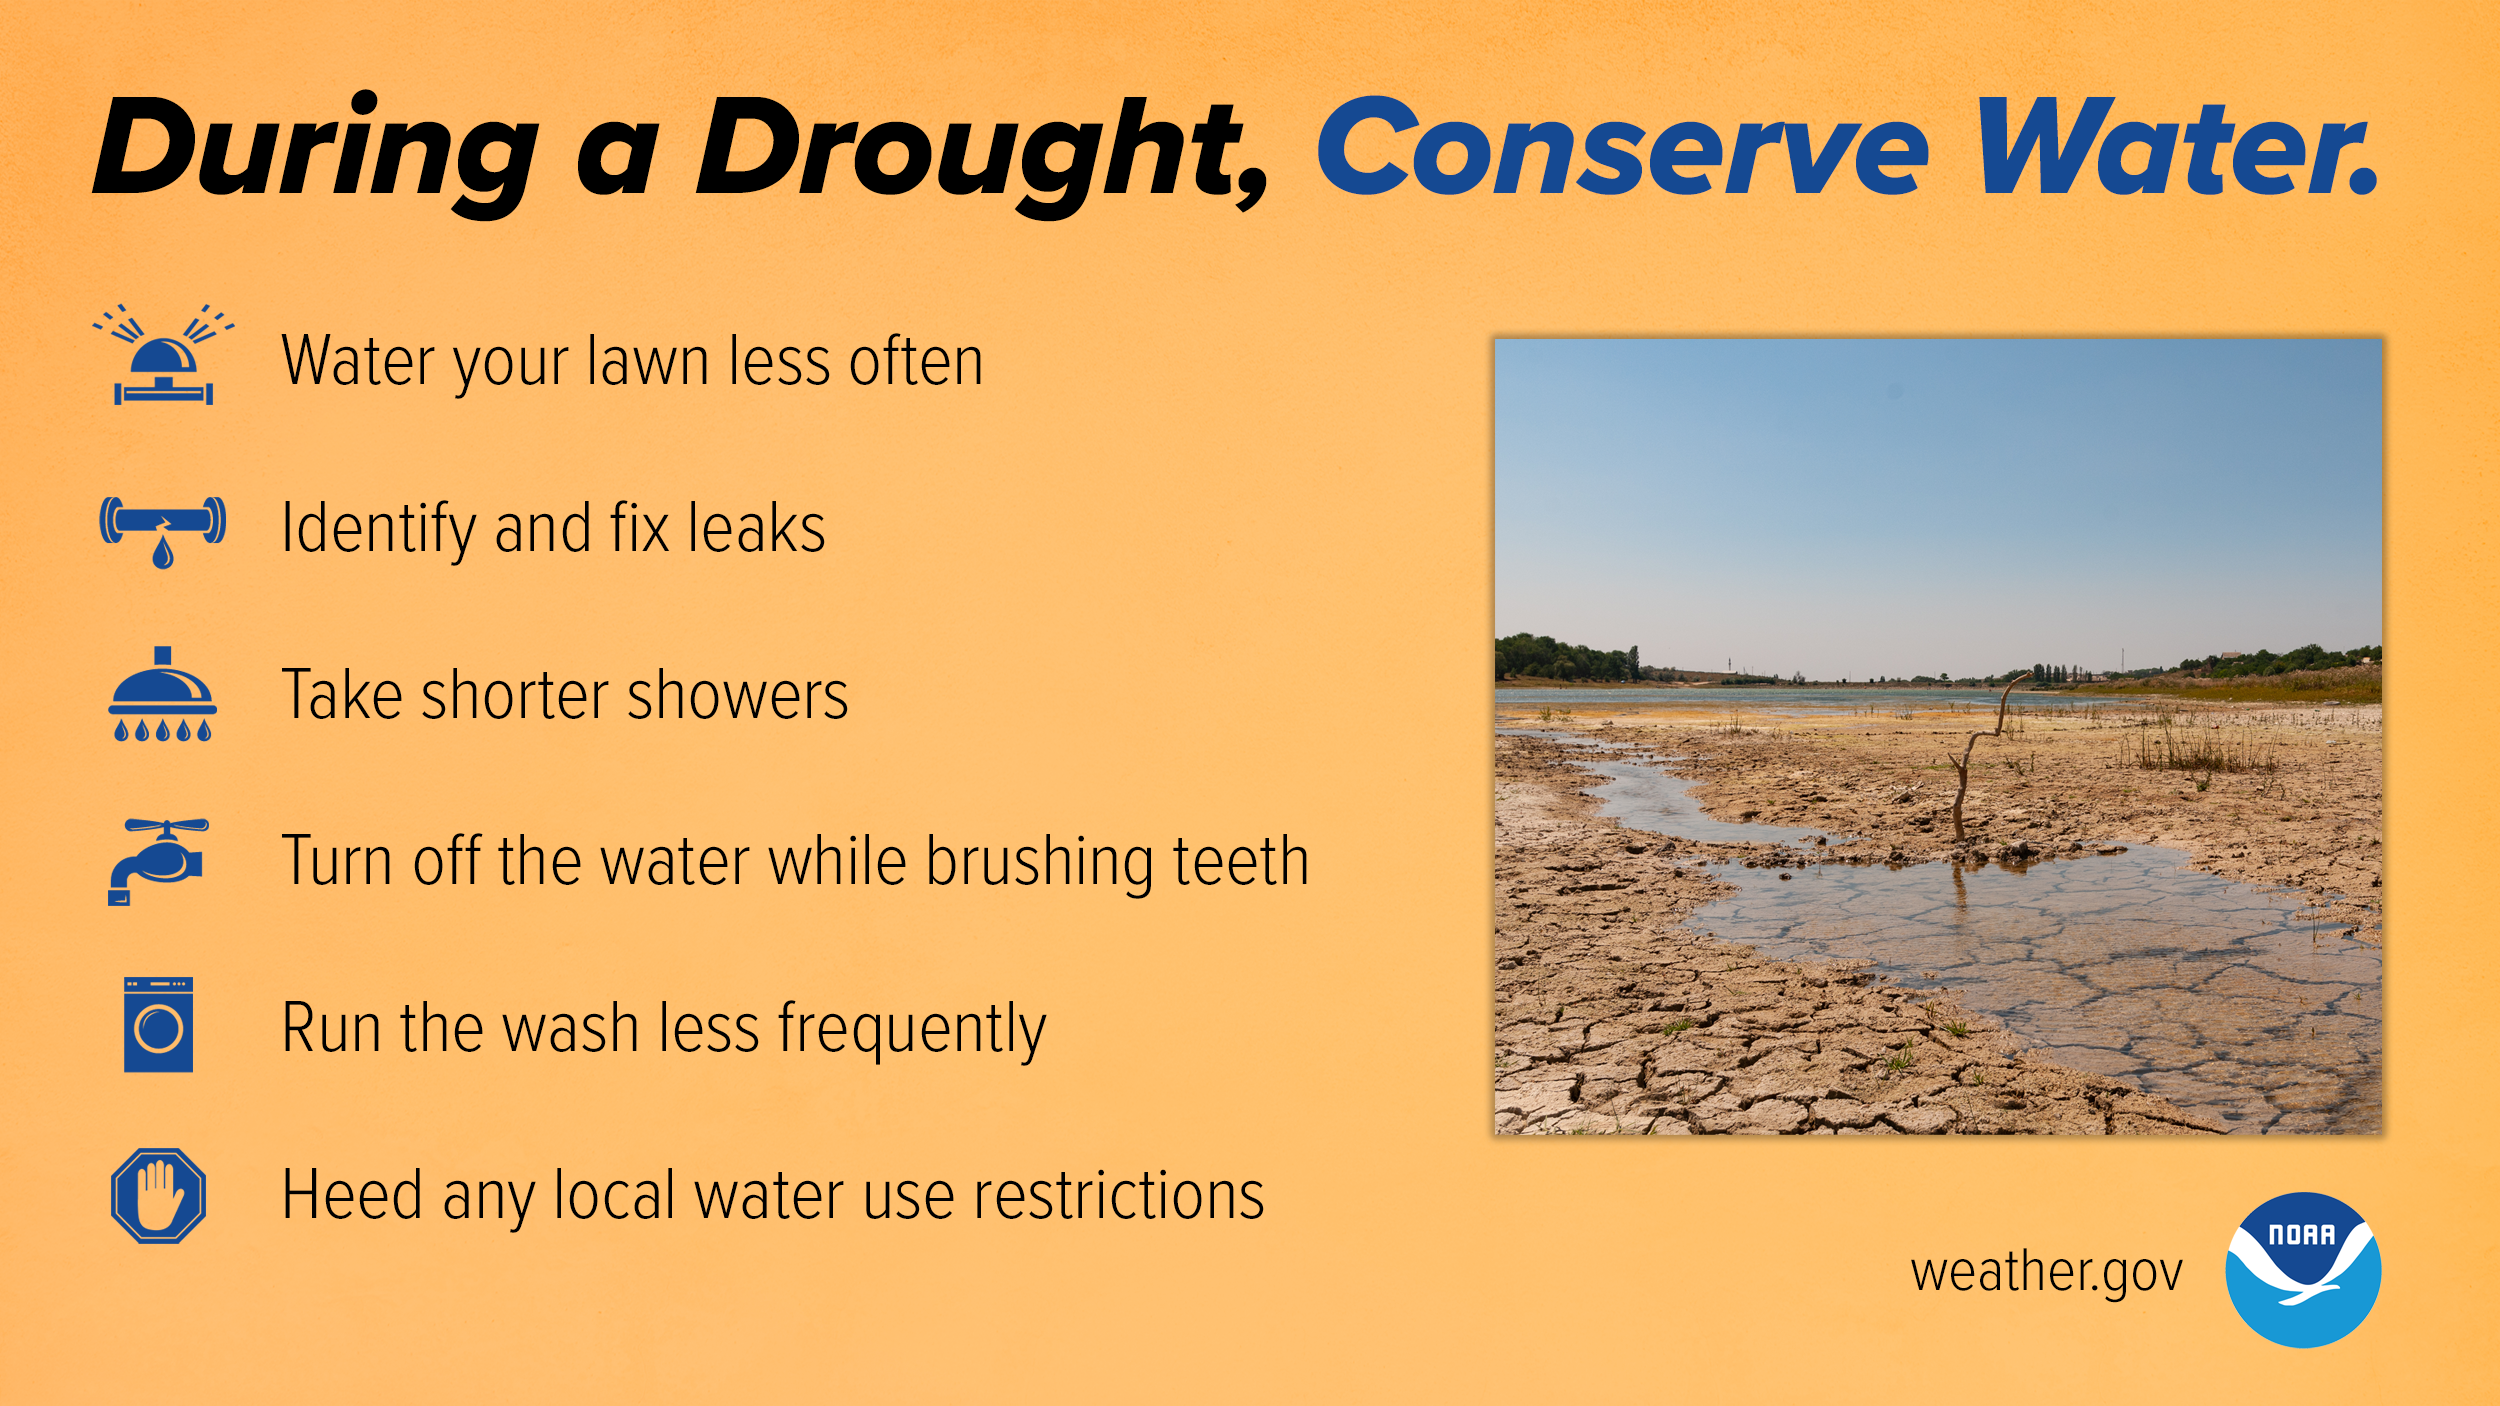 Drought - Conserve Water